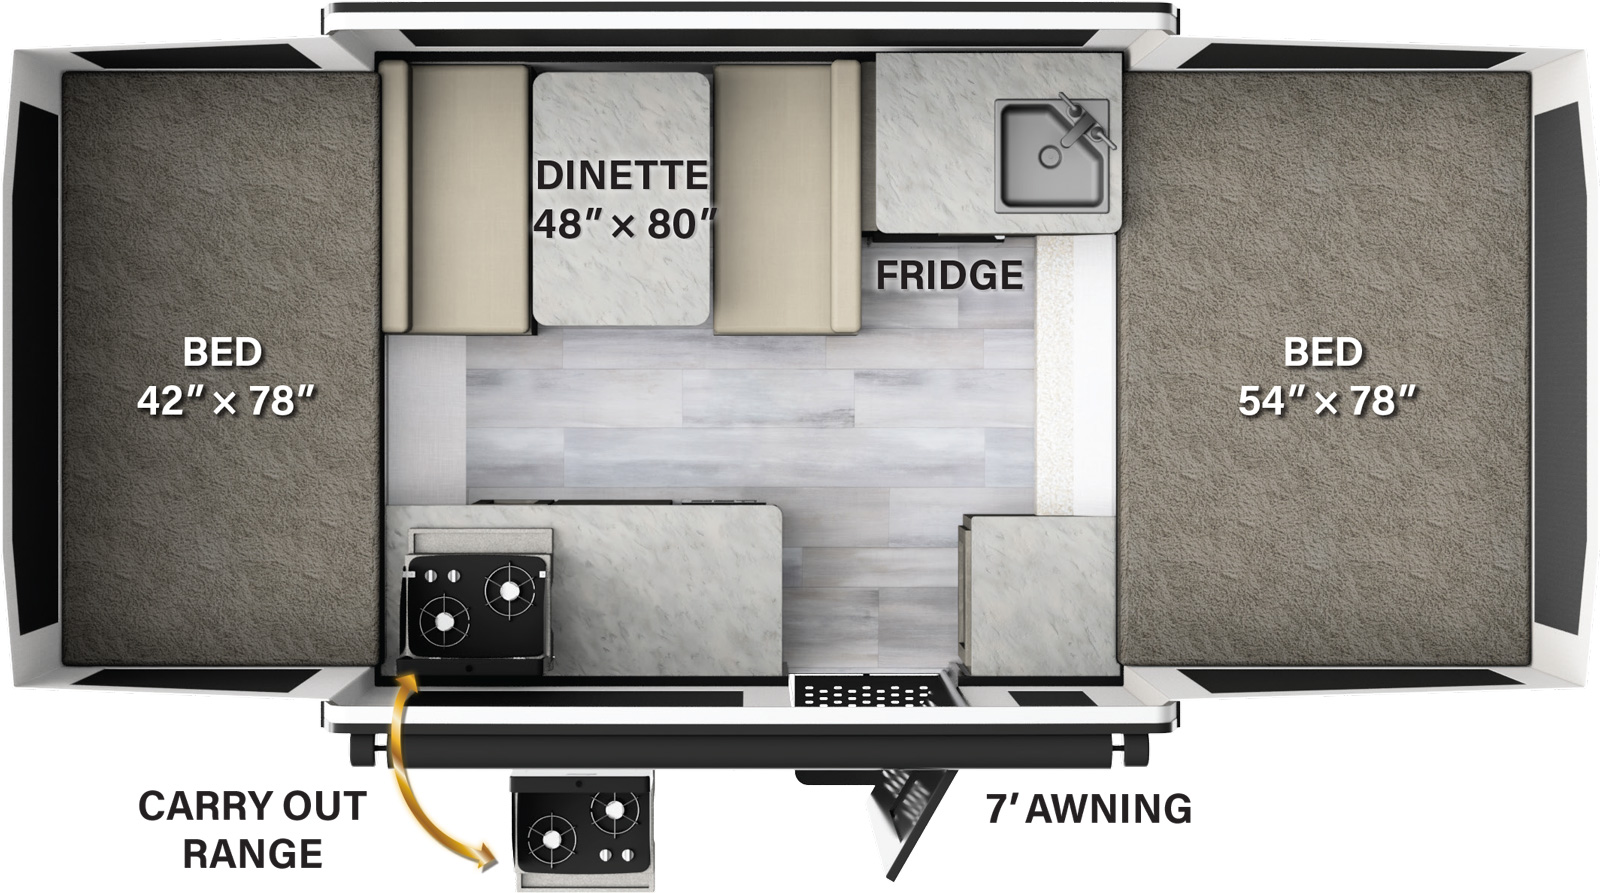 The 1640LTD has no slide outs and one entry door. Exterior features include a 7 foot awning and a carry out range; Interior layout from front to back: tent bed; kitchen area with sink, refrigerator, dinette, two cabinets, and a door top stove; rear tent bed.